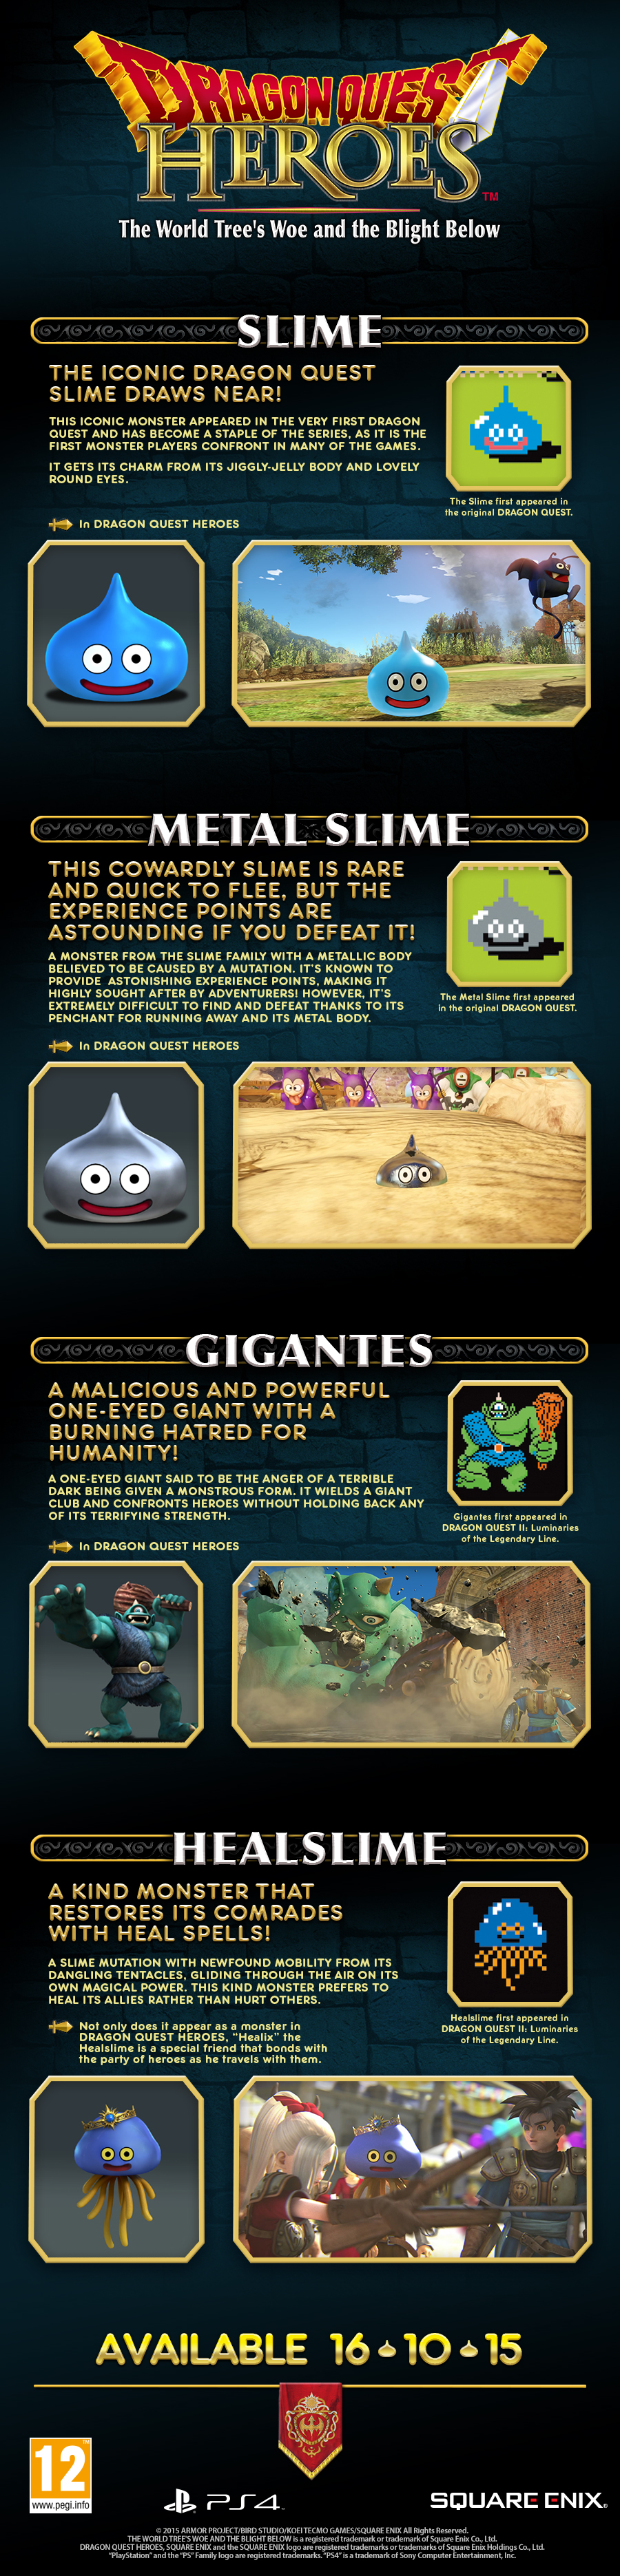 DQH_infogrfx_monsters_2